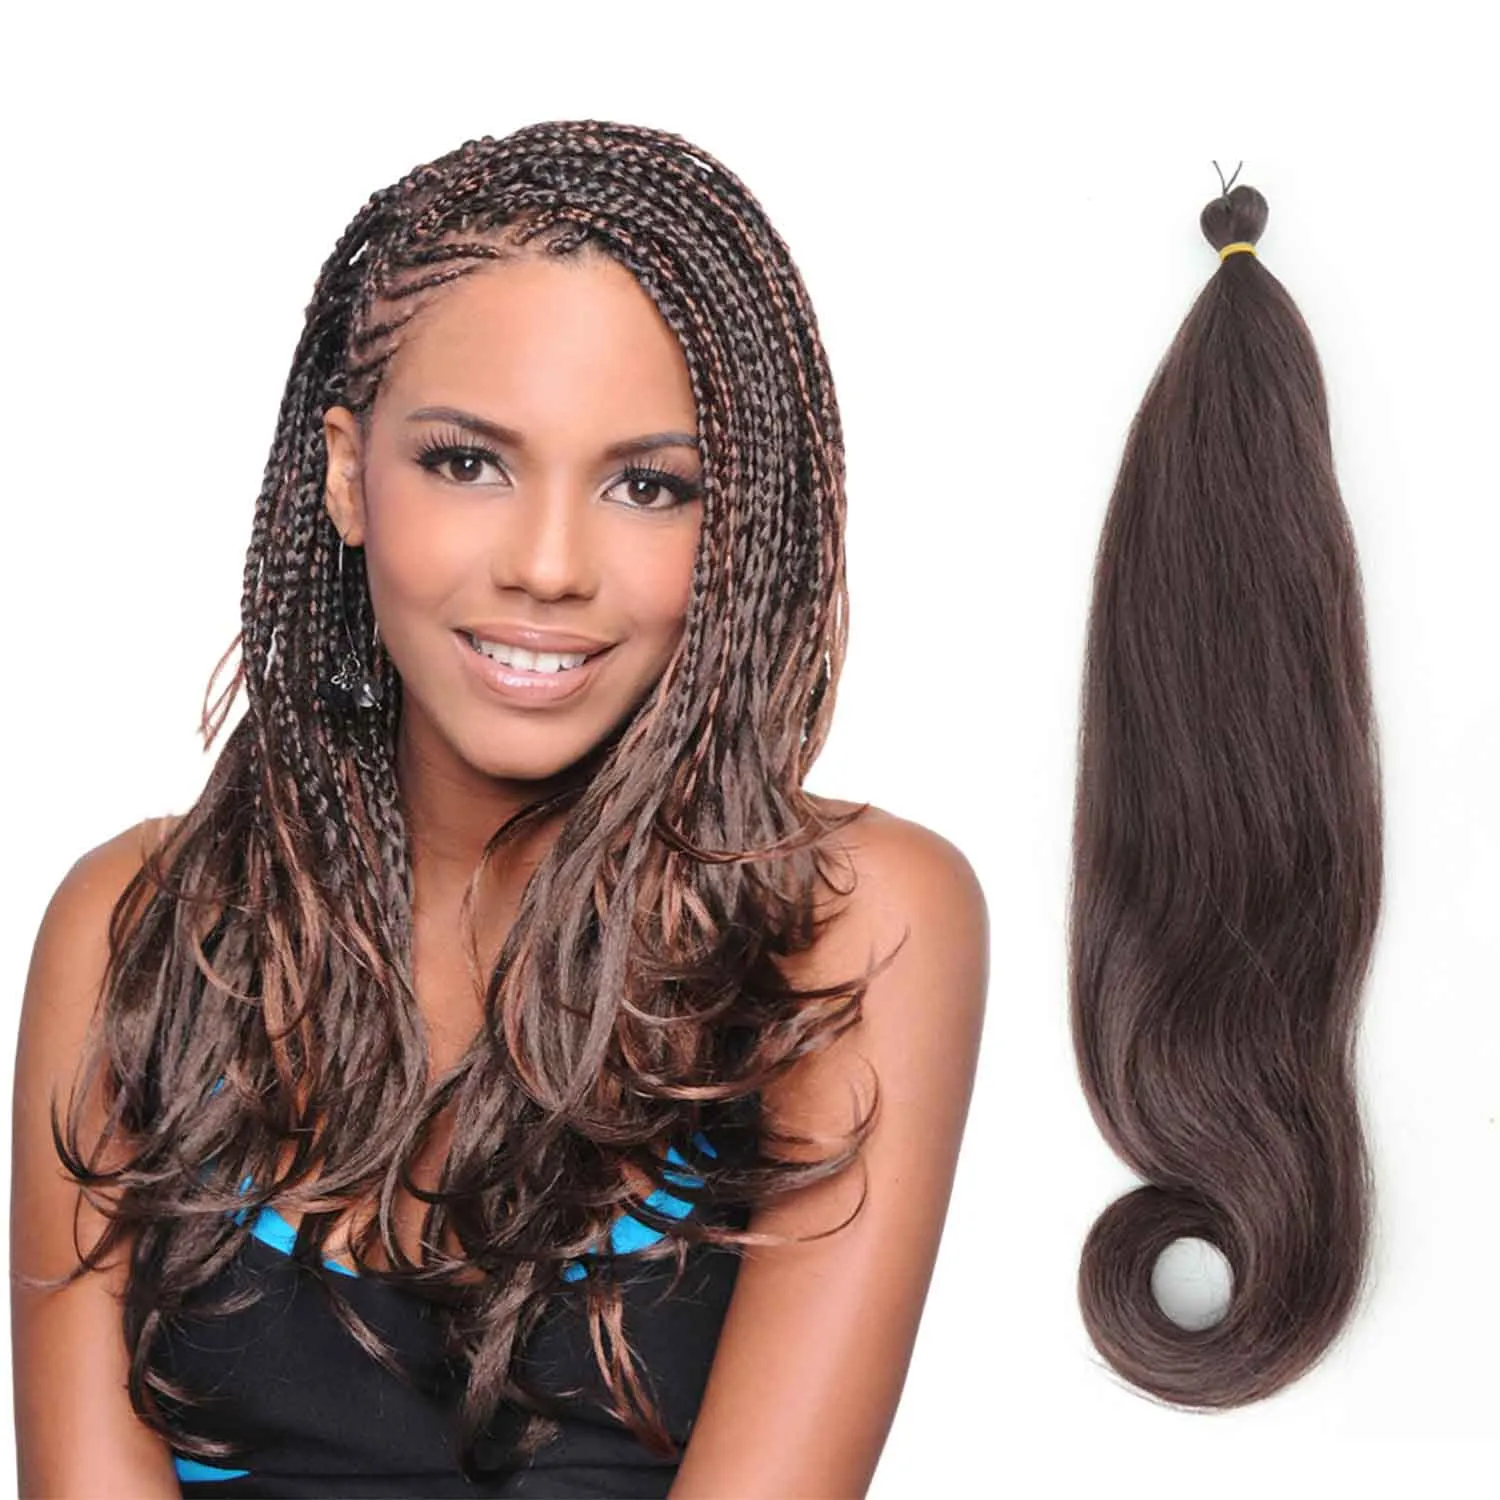 Yaki Pony Wavy Pre Stretched Synthetic Hair ExtensionsYaky Straight Braiding Hair With Curly Ends Kanekalon 24Inch 70g Crochet Braids